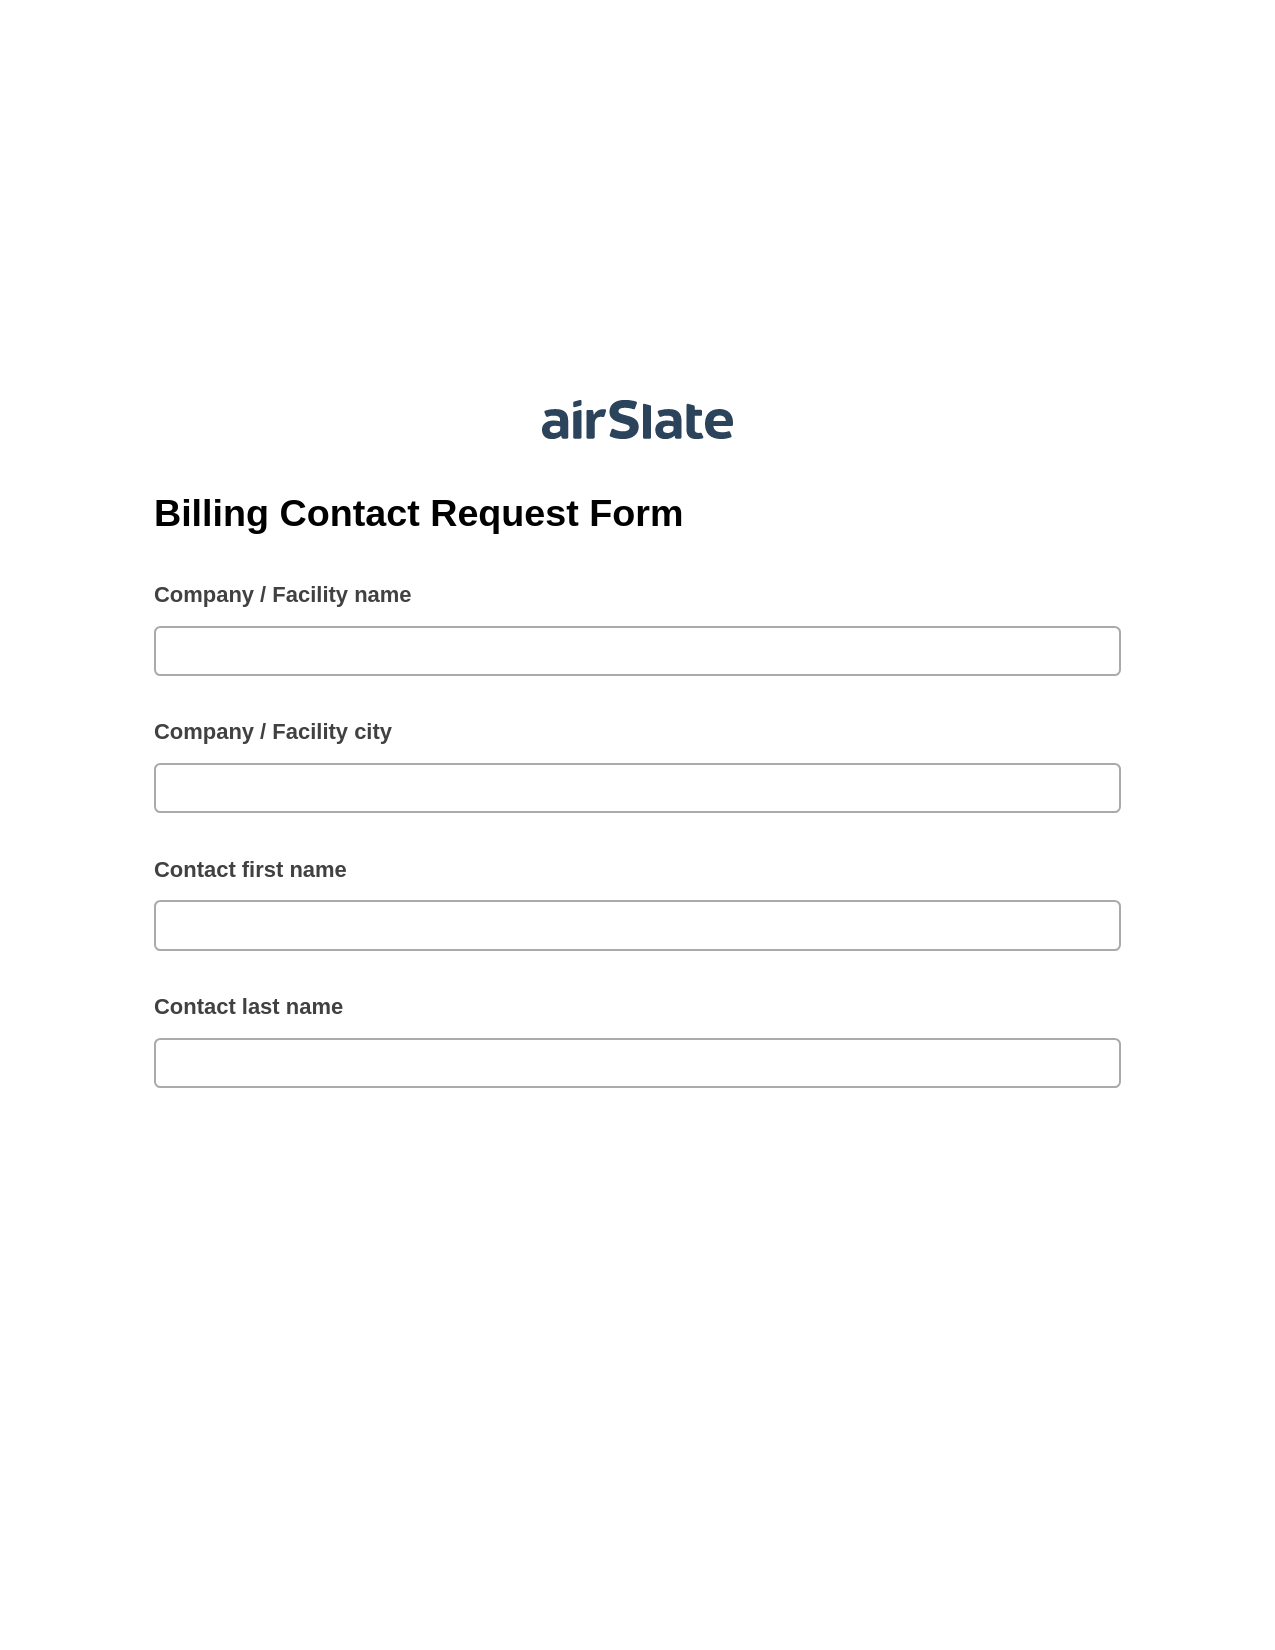 Multirole Billing Contact Request Form Pre-fill Slate from MS Dynamics 365 Records Bot, Jira Bot, Export to NetSuite Record Bot